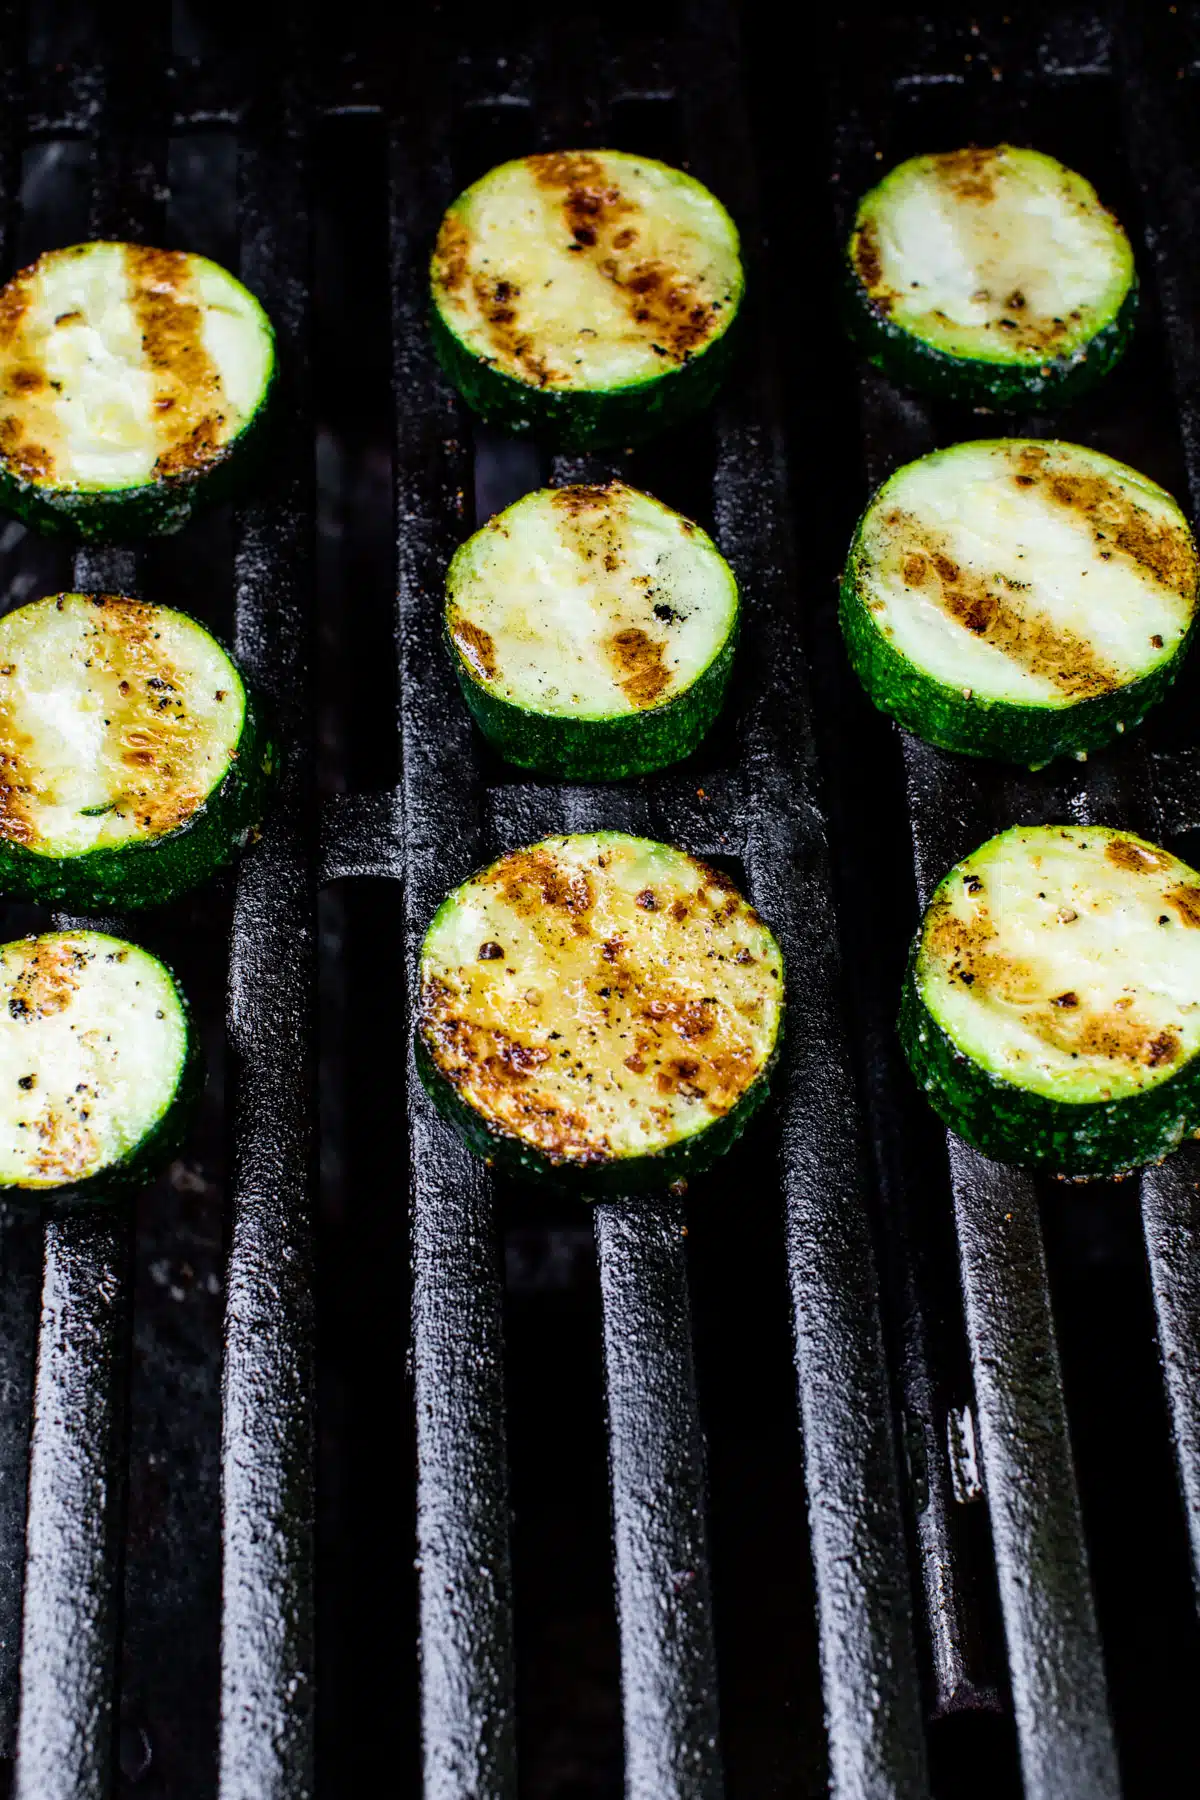 zucchini slices cooking on a grill